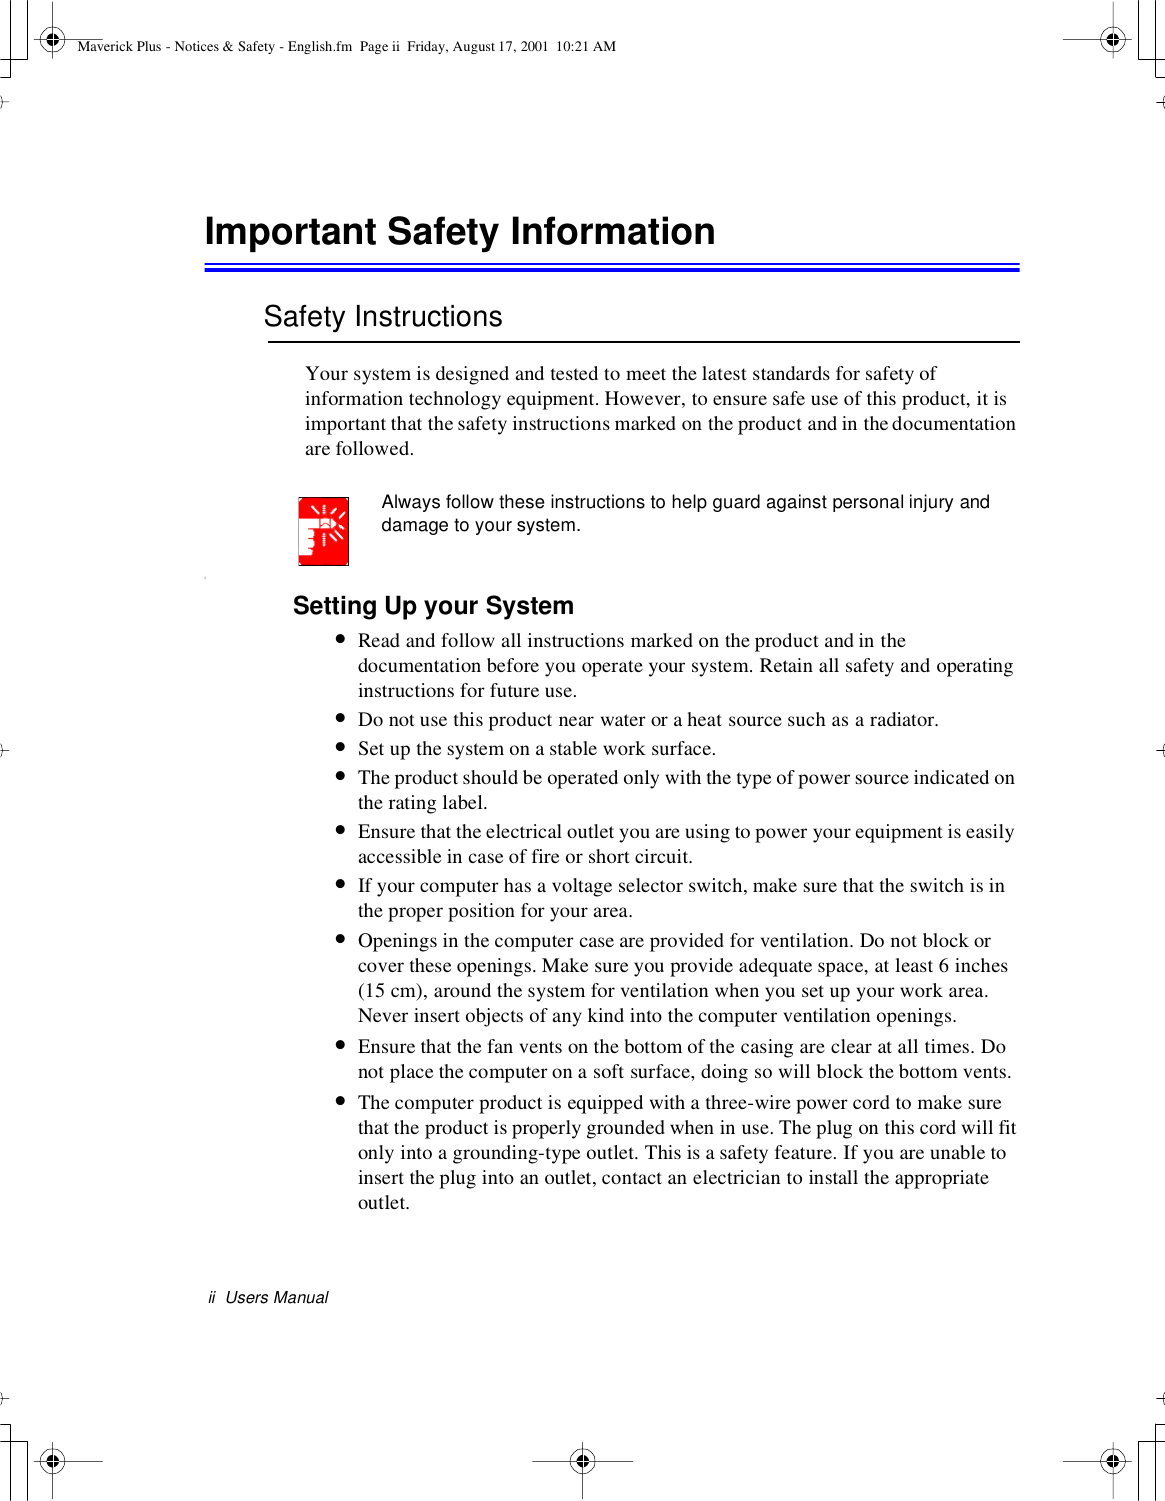 ii Users ManualImportant Safety InformationSafety InstructionsYour system is designed and tested to meet the latest standards for safety ofinformation technology equipment. However, to ensure safe use of this product, it isimportant that the safety instructions marked on the product and in thedocumentationare followed.Always follow these instructions to help guard against personal injury anddamage to your system.iSetting Up your System•Read and follow all instructions marked on the product and in thedocumentation before you operate your system. Retain all safety and operatinginstructions for future use.•Do not use this product near water or a heat source such as a radiator.•Set up the system on a stable work surface.•The product should be operated only with the type of power source indicated onthe rating label.•Ensure that the electrical outlet you are using to power your equipment is easilyaccessible in case of fire or short circuit.•If your computer has a voltage selector switch, make sure that the switch is inthe proper position for your area.•Openings in the computer case are provided for ventilation. Do not block orcover these openings. Make sure you provide adequate space, at least 6 inches(15 cm), around the system for ventilation when you set up your work area.Never insert objects of any kind into the computer ventilation openings.•Ensure that the fan vents on the bottom of the casing are clear at all times. Donot place the computer on a soft surface, doing so will block the bottom vents.•The computer product is equipped with a three-wire power cord to make surethat the product is properly grounded when in use. The plug on this cord will fitonly into a grounding-type outlet. This is a safety feature. If you are unable toinsert the plug into an outlet, contact an electrician to install the appropriateoutlet.Maverick Plus - Notices &amp; Safety - English.fm Page ii Friday, August 17, 2001 10:21 AM